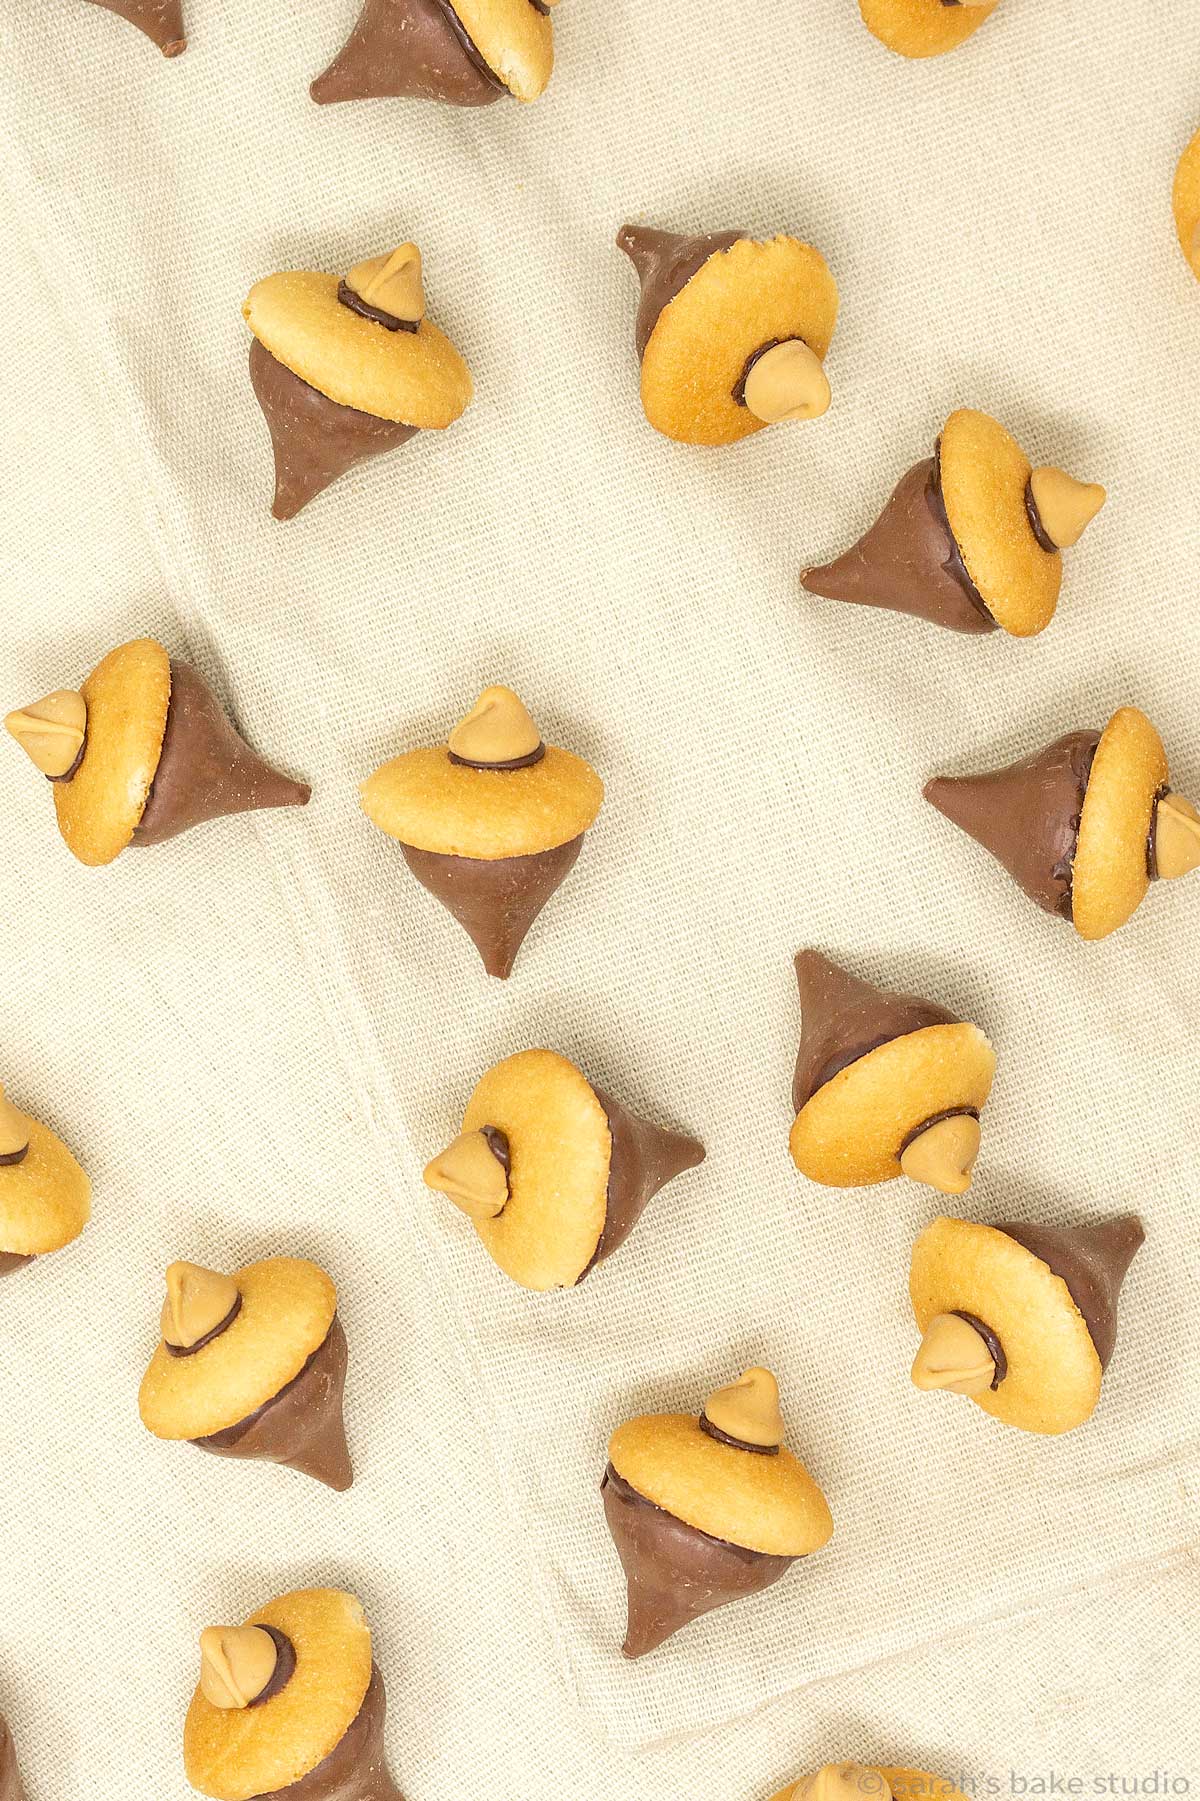 Chocolate Acorn Cookies - super easy and utterly adorable edible acorns made of chocolate, Hershey's Kisses, and mini vanilla wafer cookies; a perfect addition to your Thanksgiving desserts.